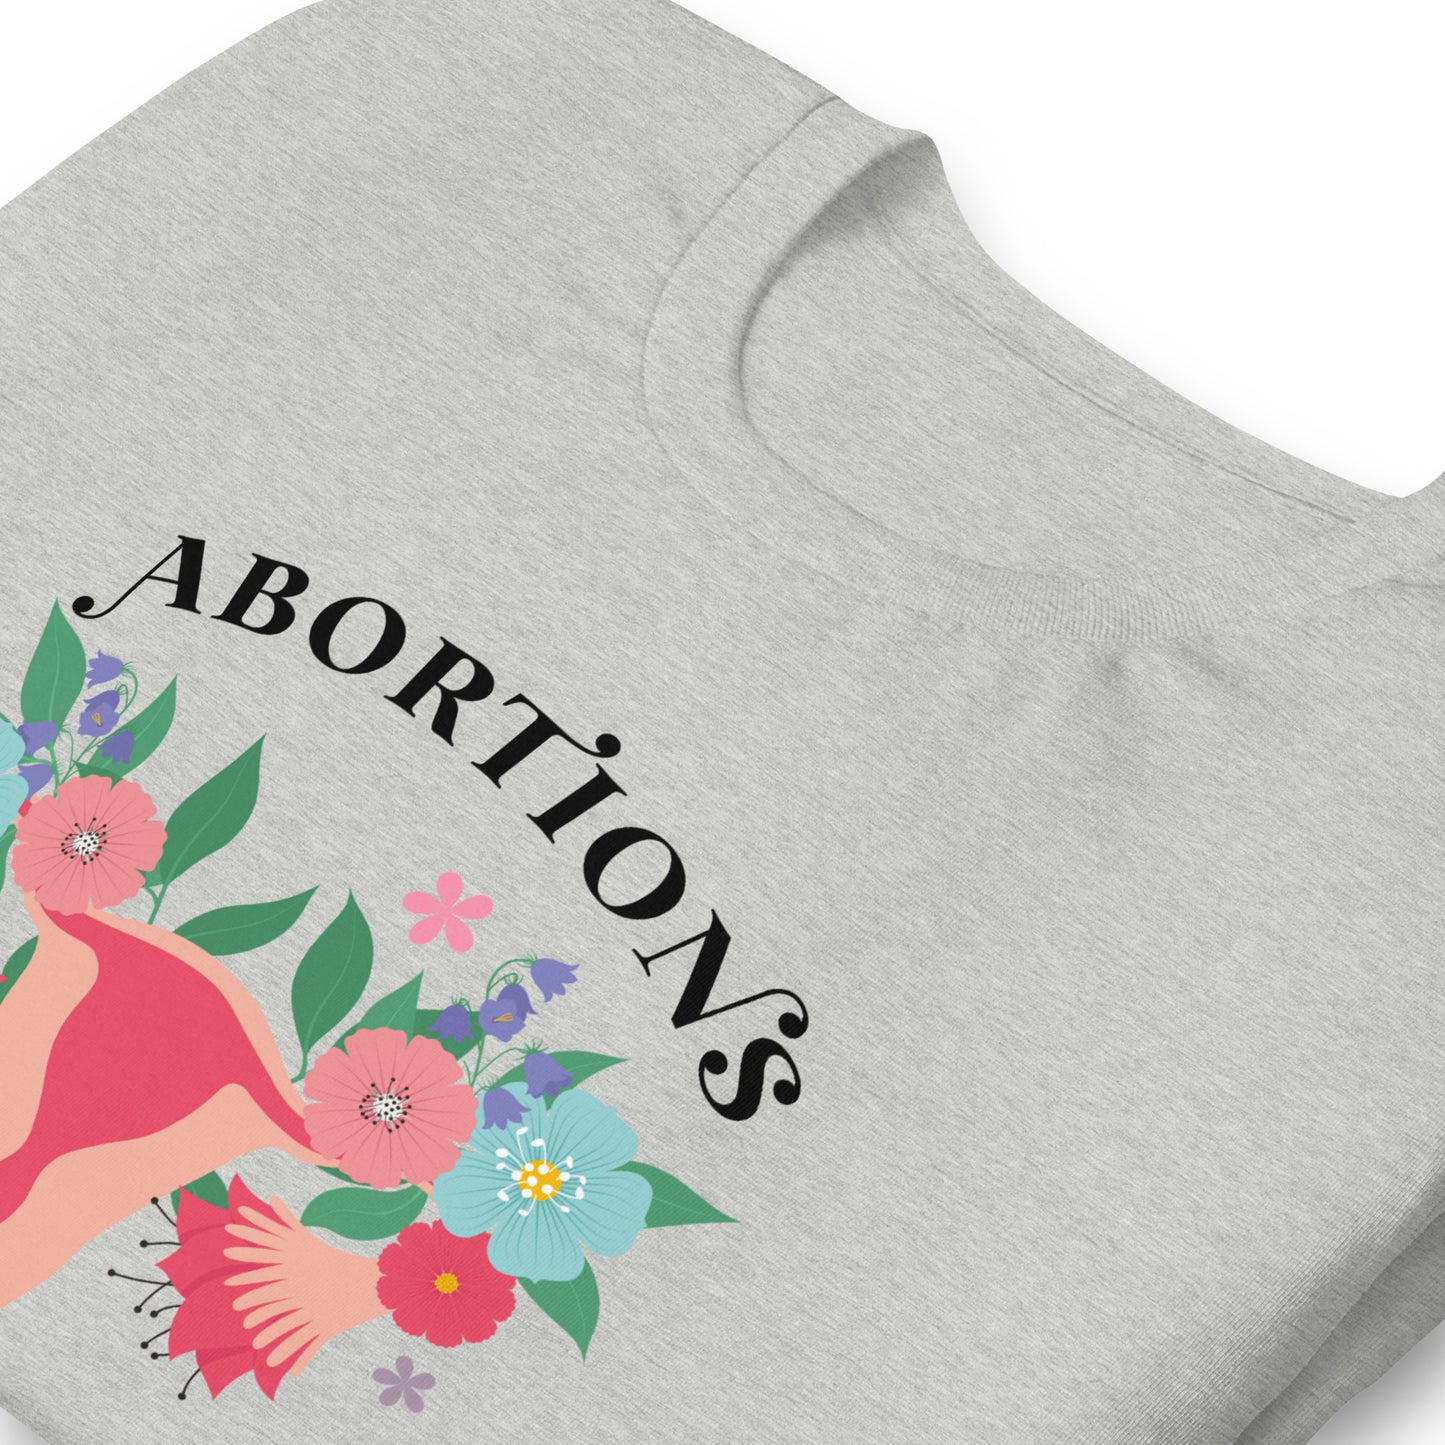 Abortions Save Lives Unisex t-shirt